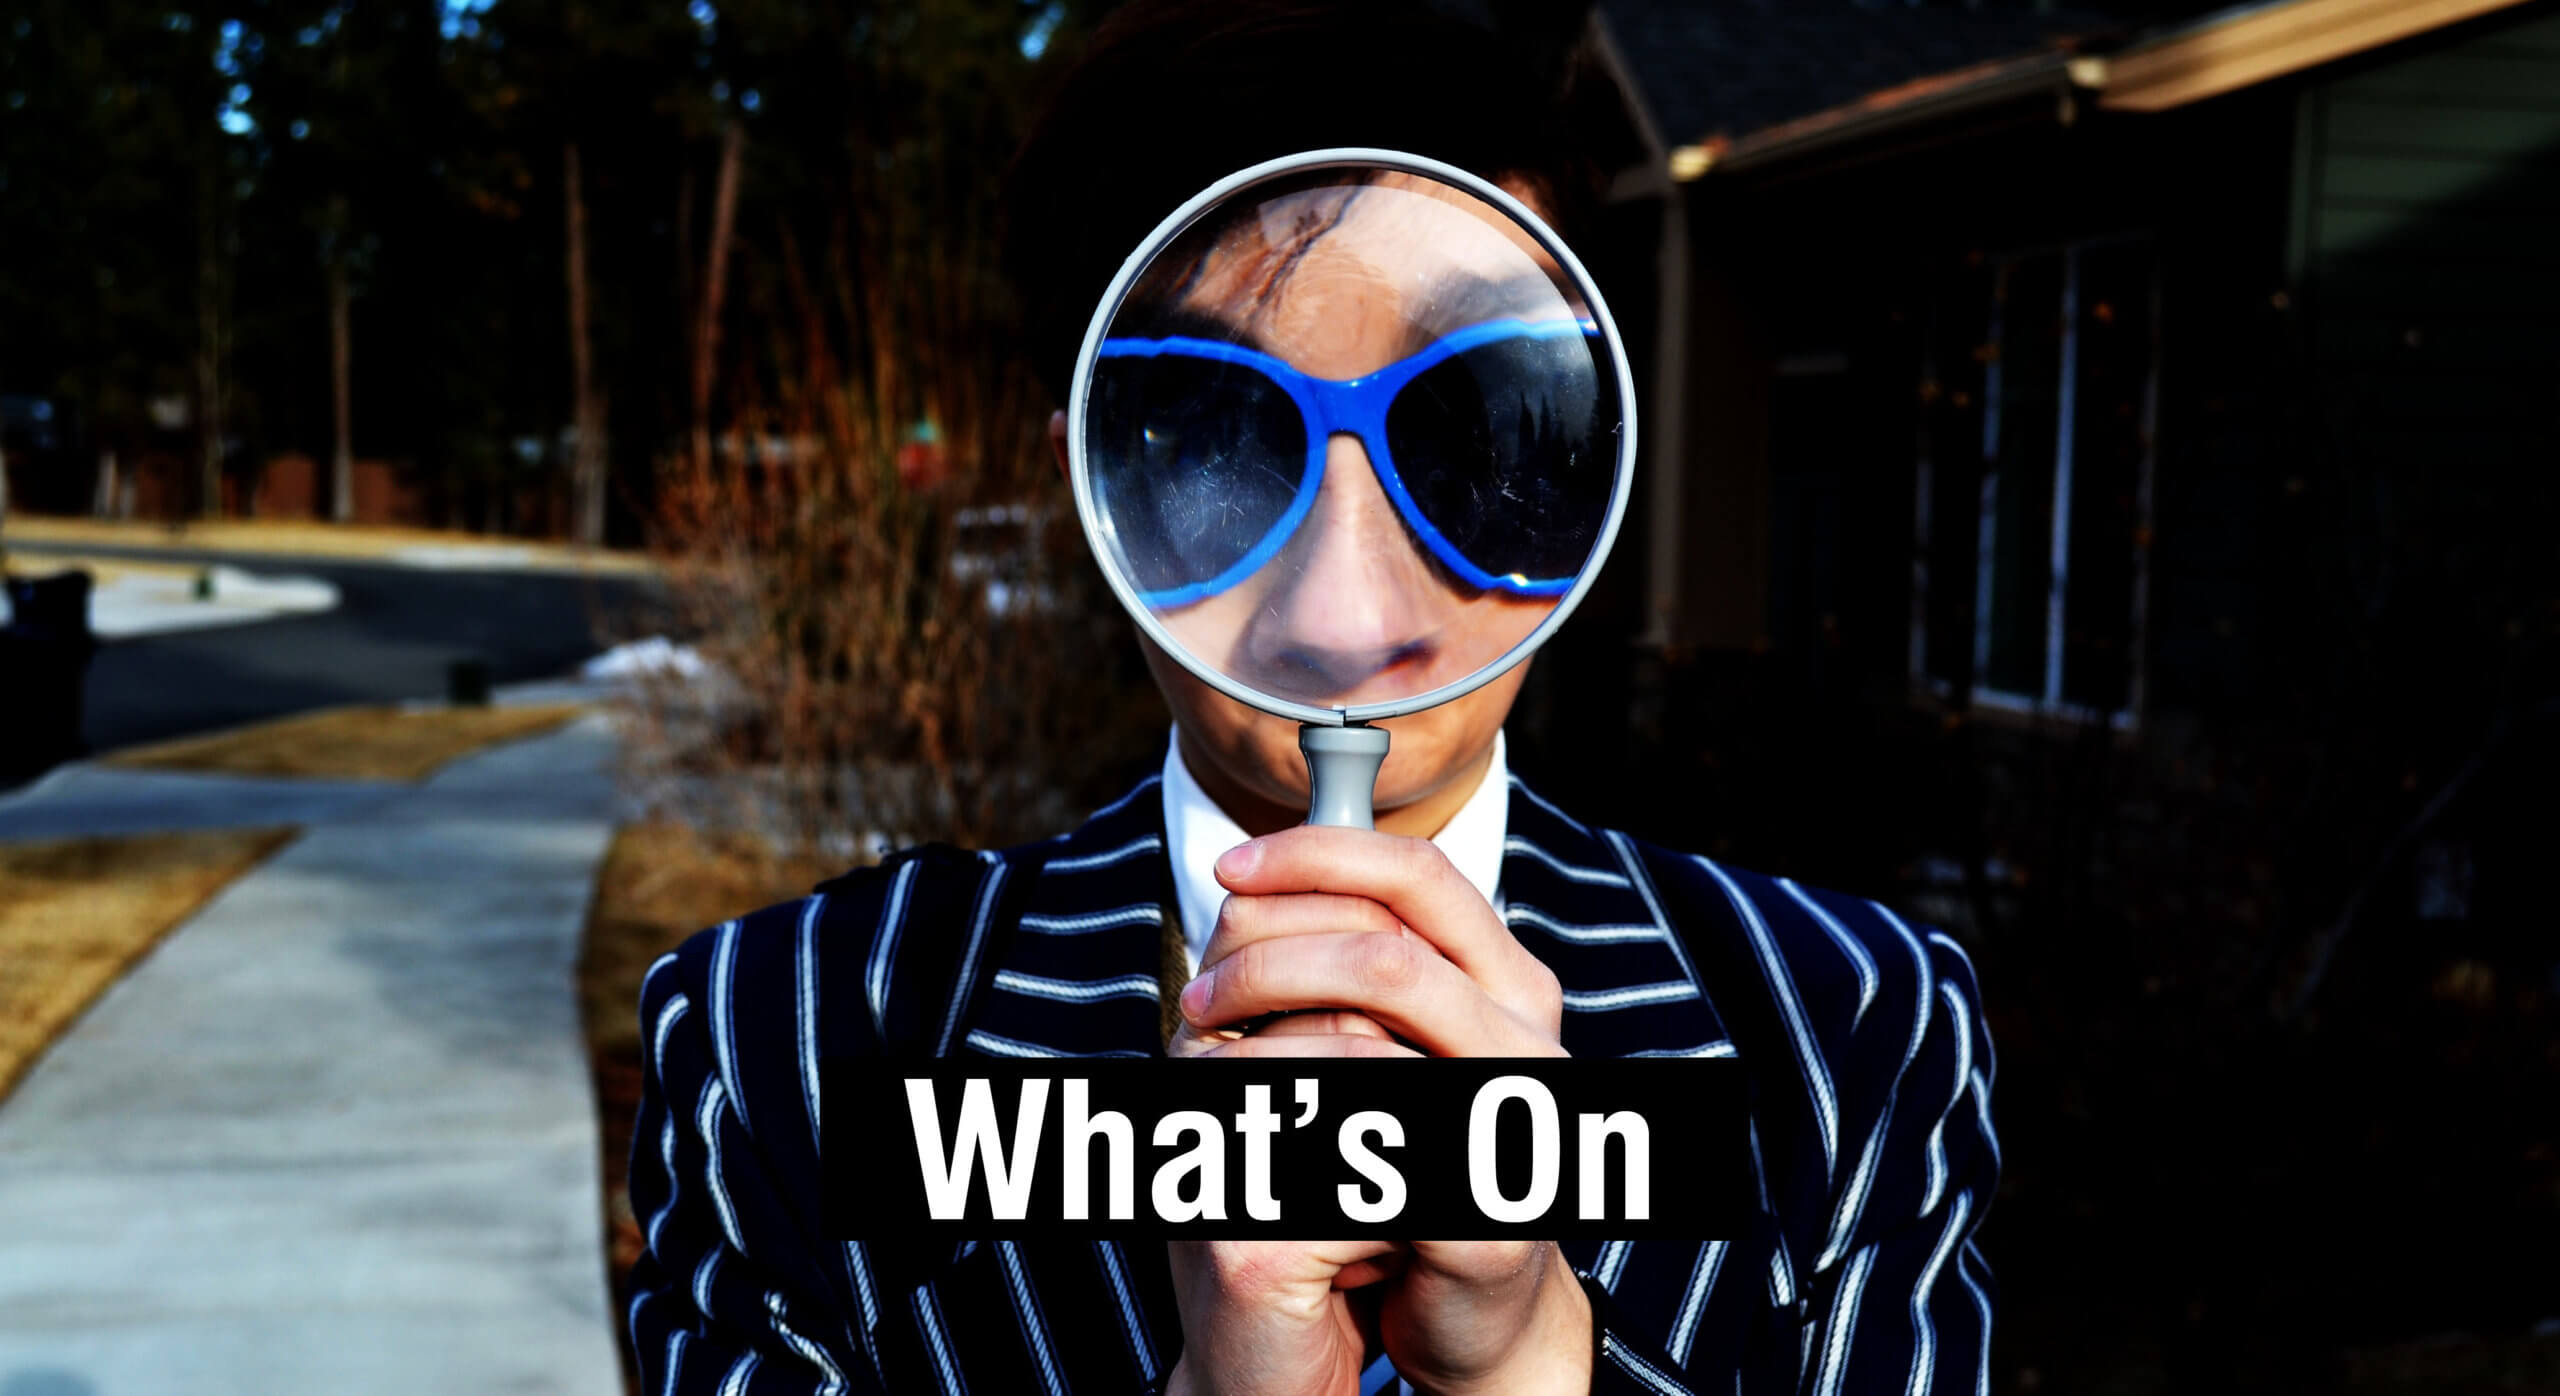 Figure in pinstripe suit wearing blue sunglasses. Figure is hold a magnifying glass over their face filling the glass with just blue sunglasses.